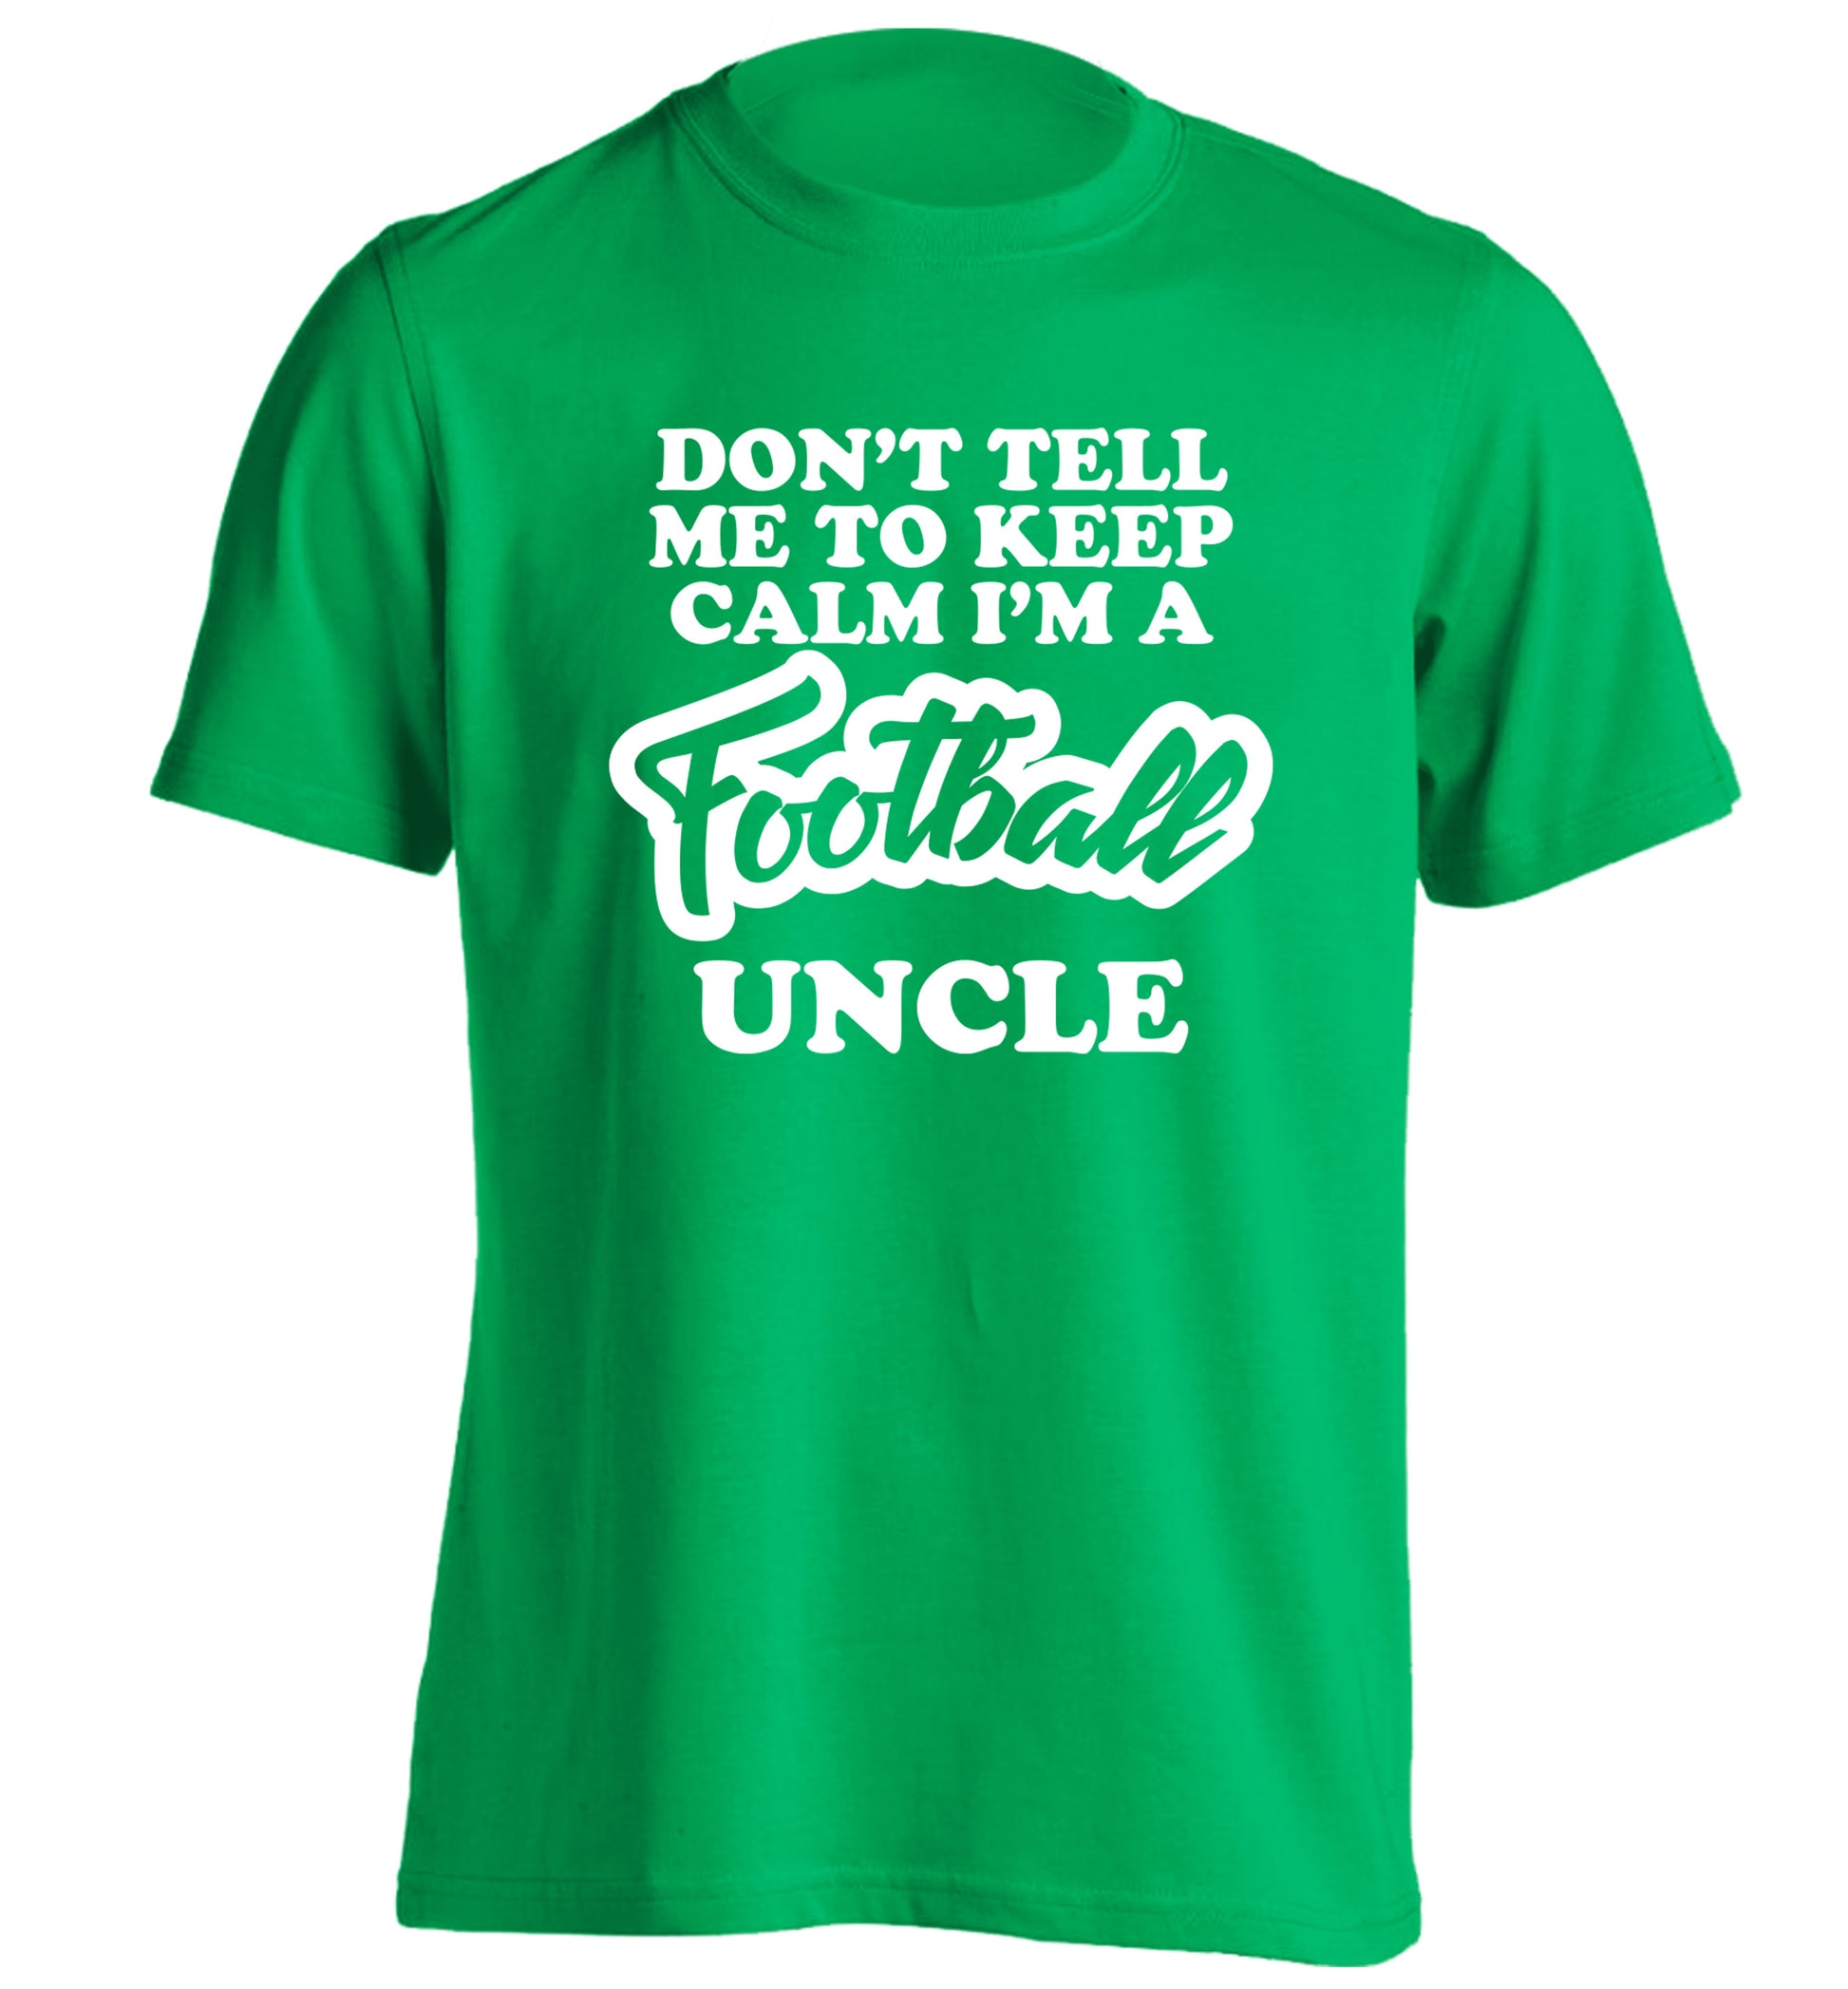 Don't tell me to keep calm I'm a football uncle adults unisexgreen Tshirt 2XL